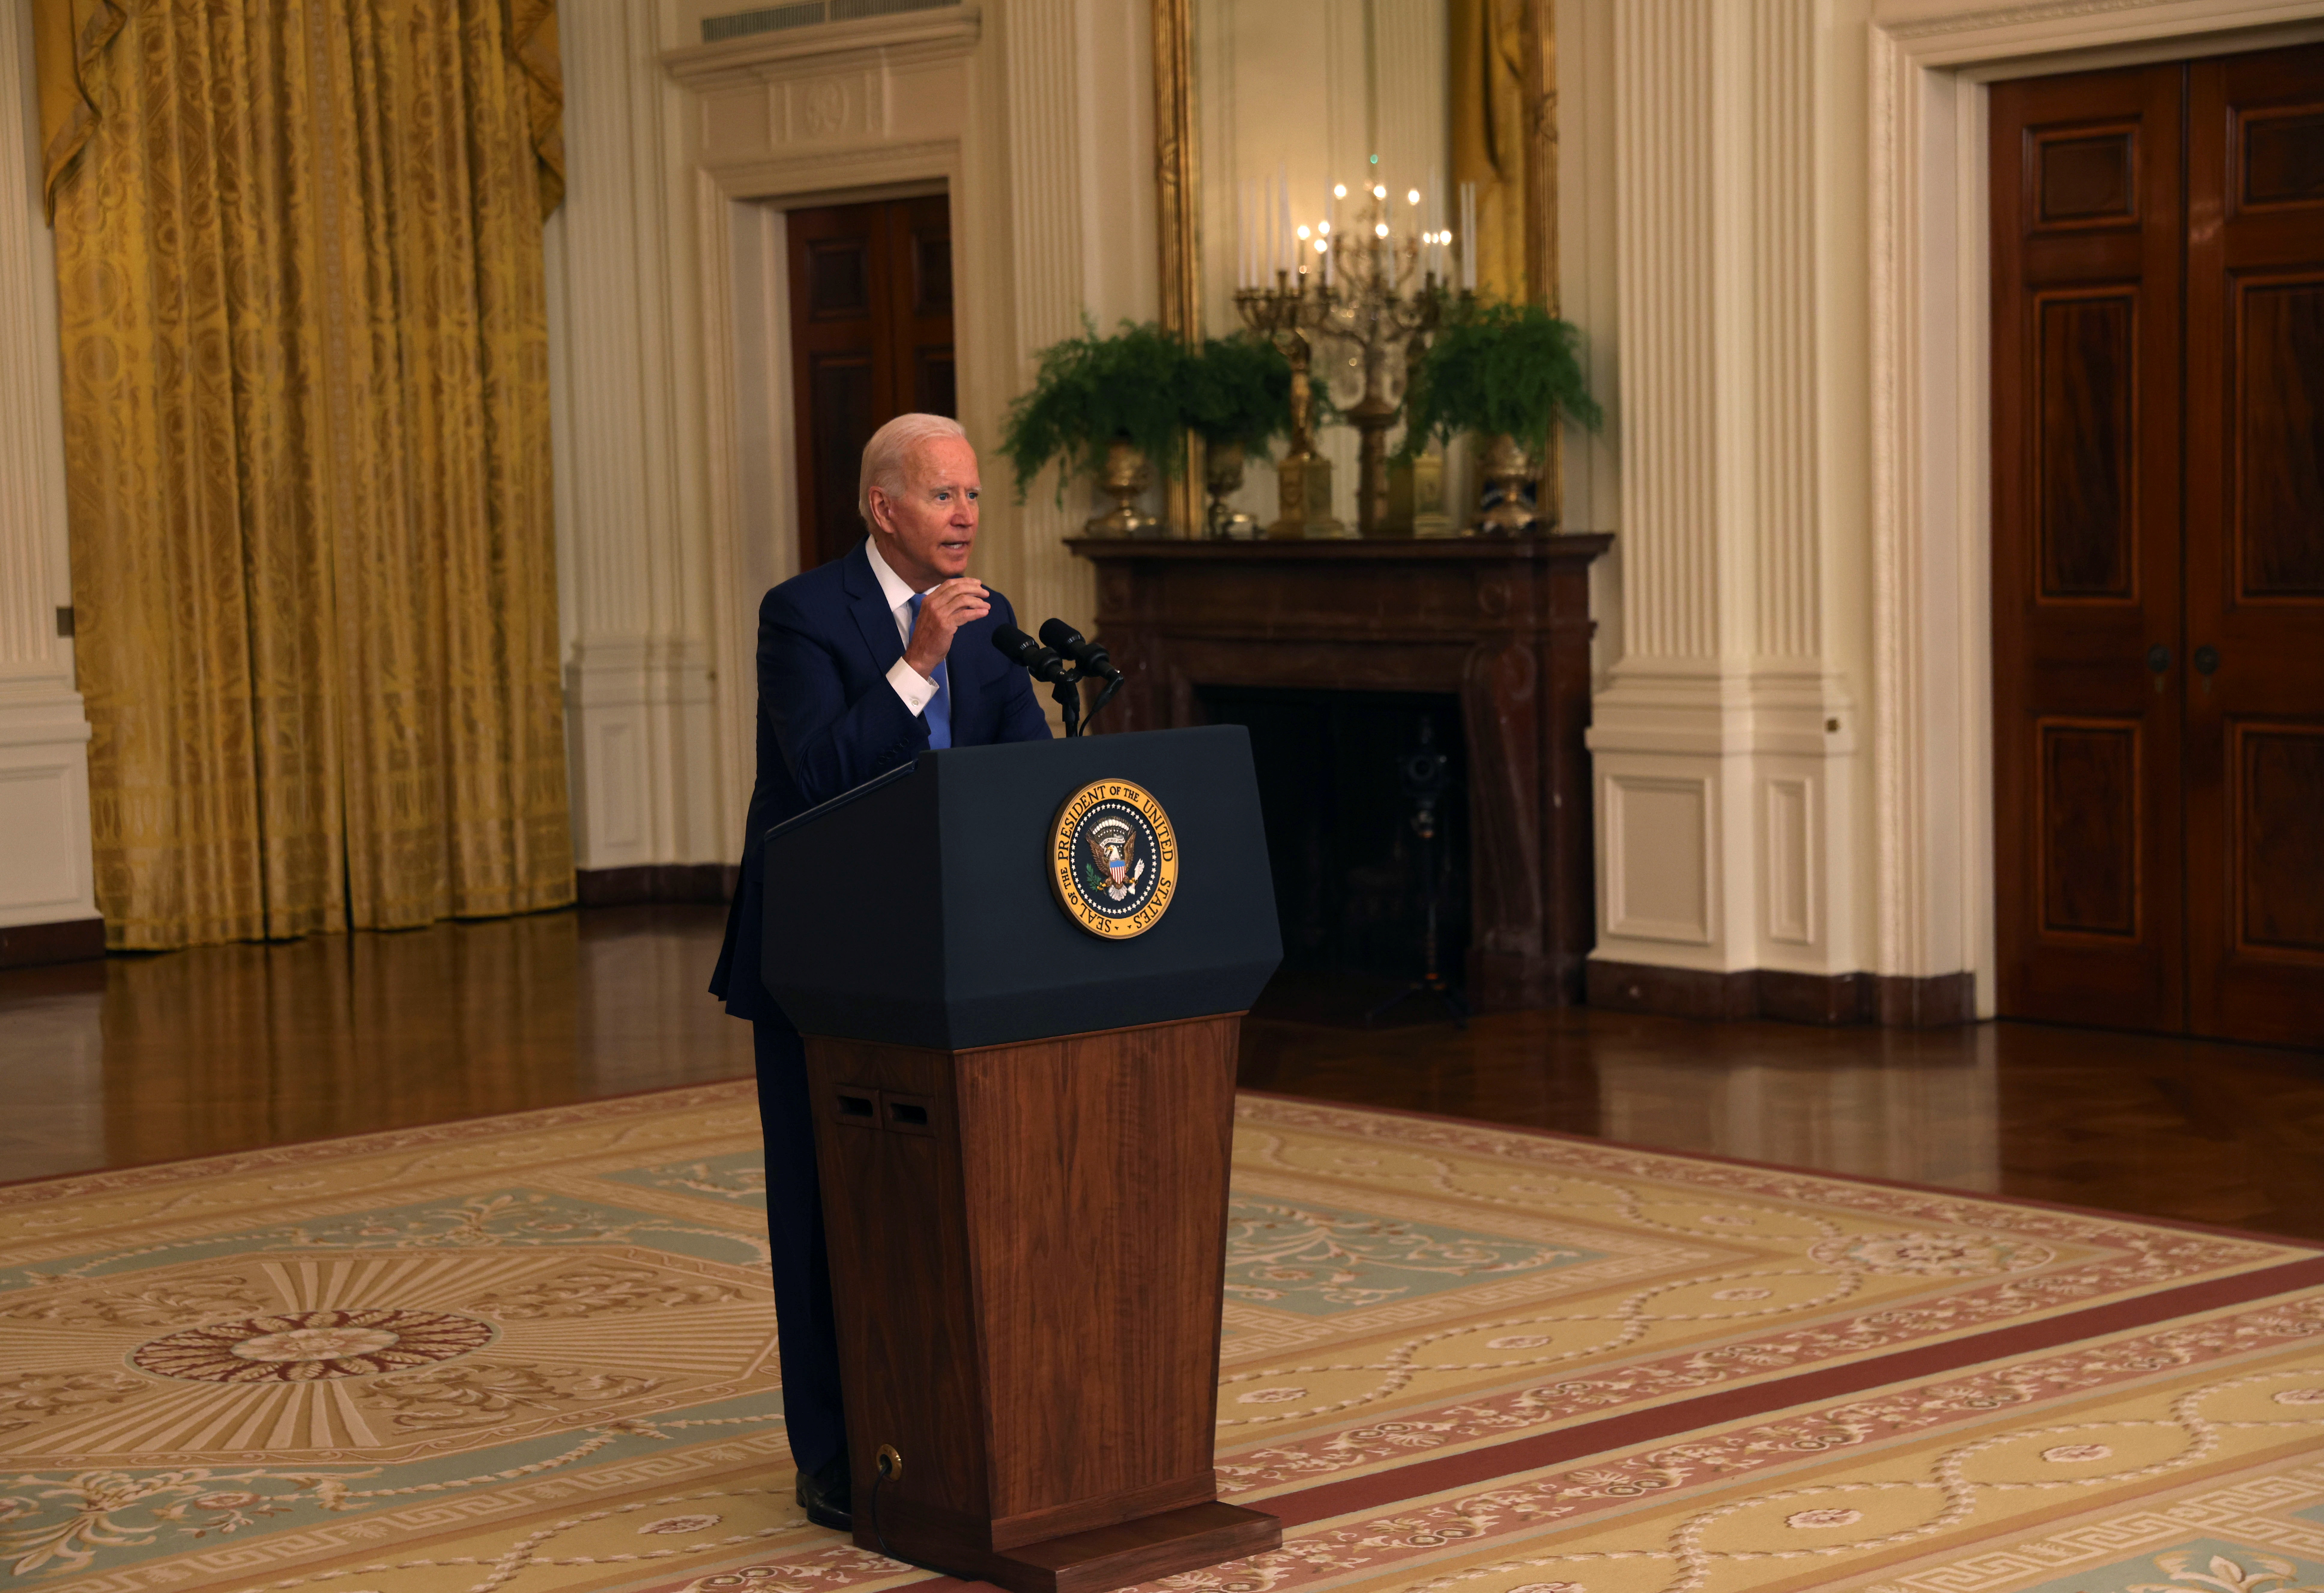 U.S. President Biden delivers remarks on the economy in the White House